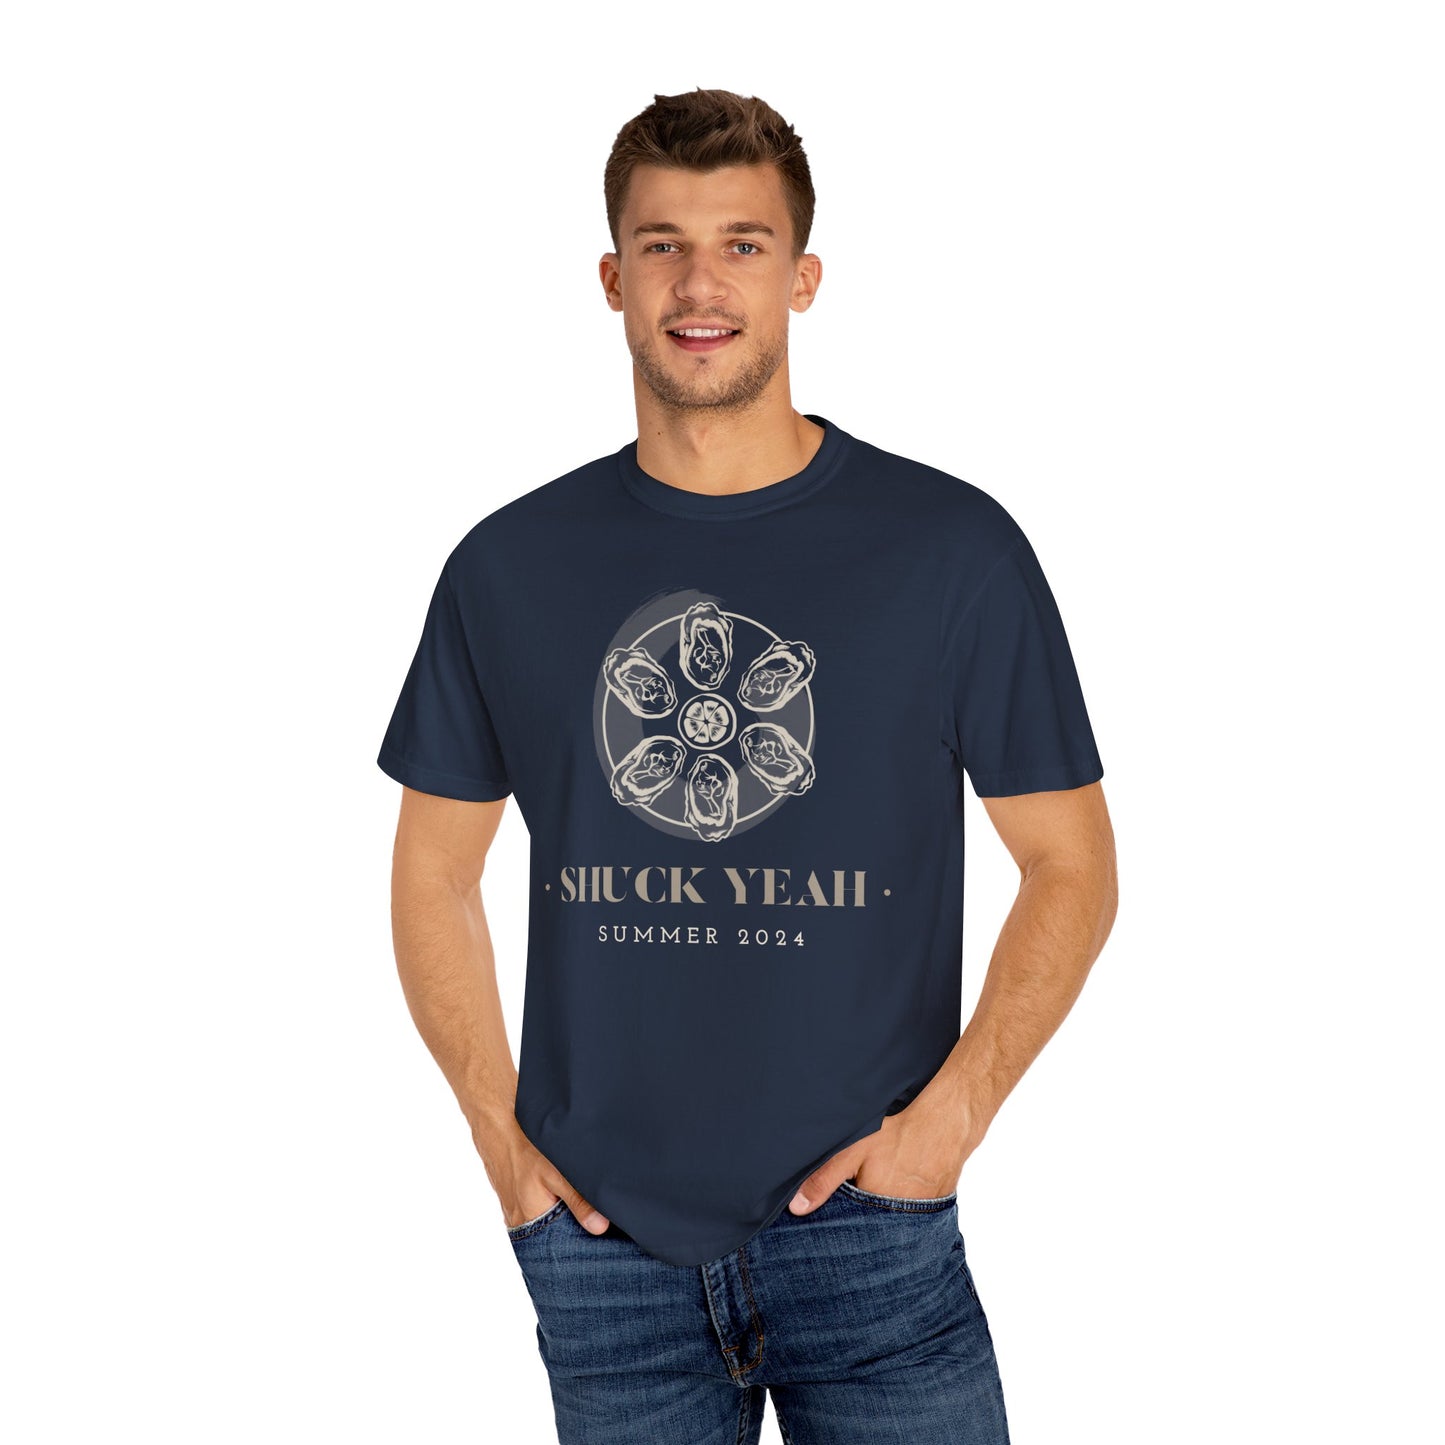 Shuck Yeah Summer 2024 Oyster T-Shirt - Comfort Colors 1717, 100% Ring-Spun Cotton, Relaxed Fit